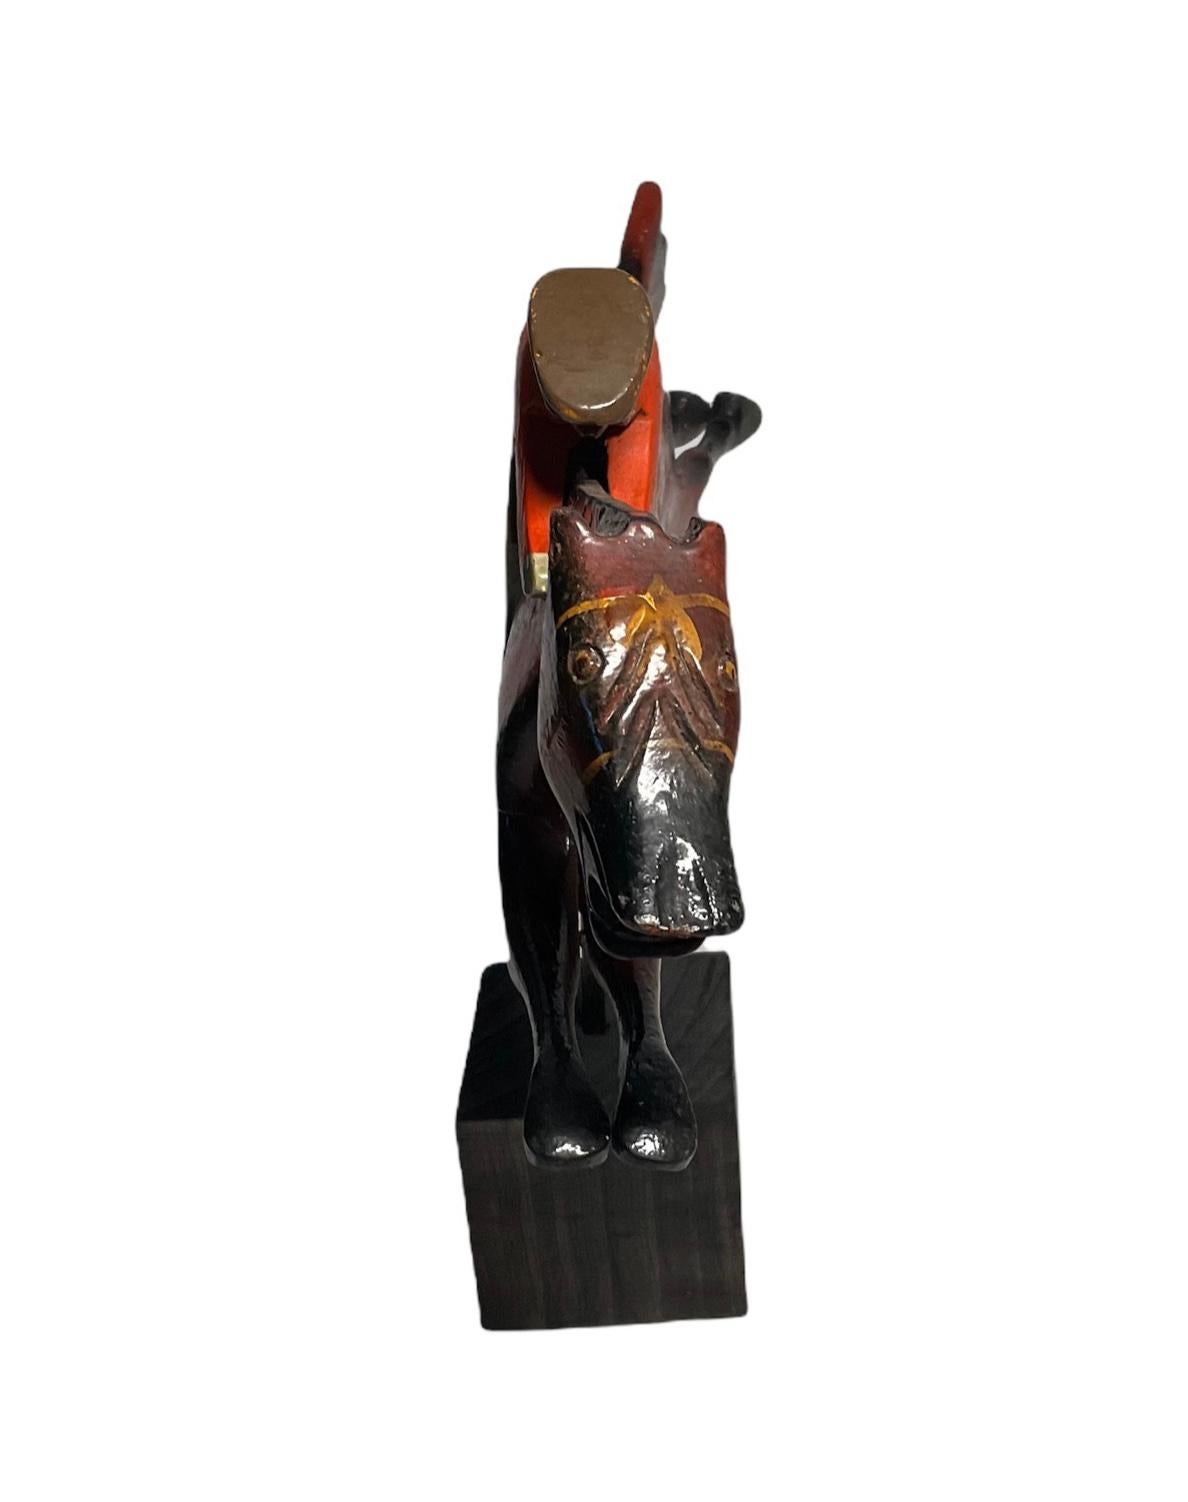 This is a wood hand crafted sculpture of a jockey and a horse made by Puerto Rican’s craft-men with wood from the island. The sculpture is made in three parts- the jockey with the front upper part of the horse, the legs and then, the tail. After